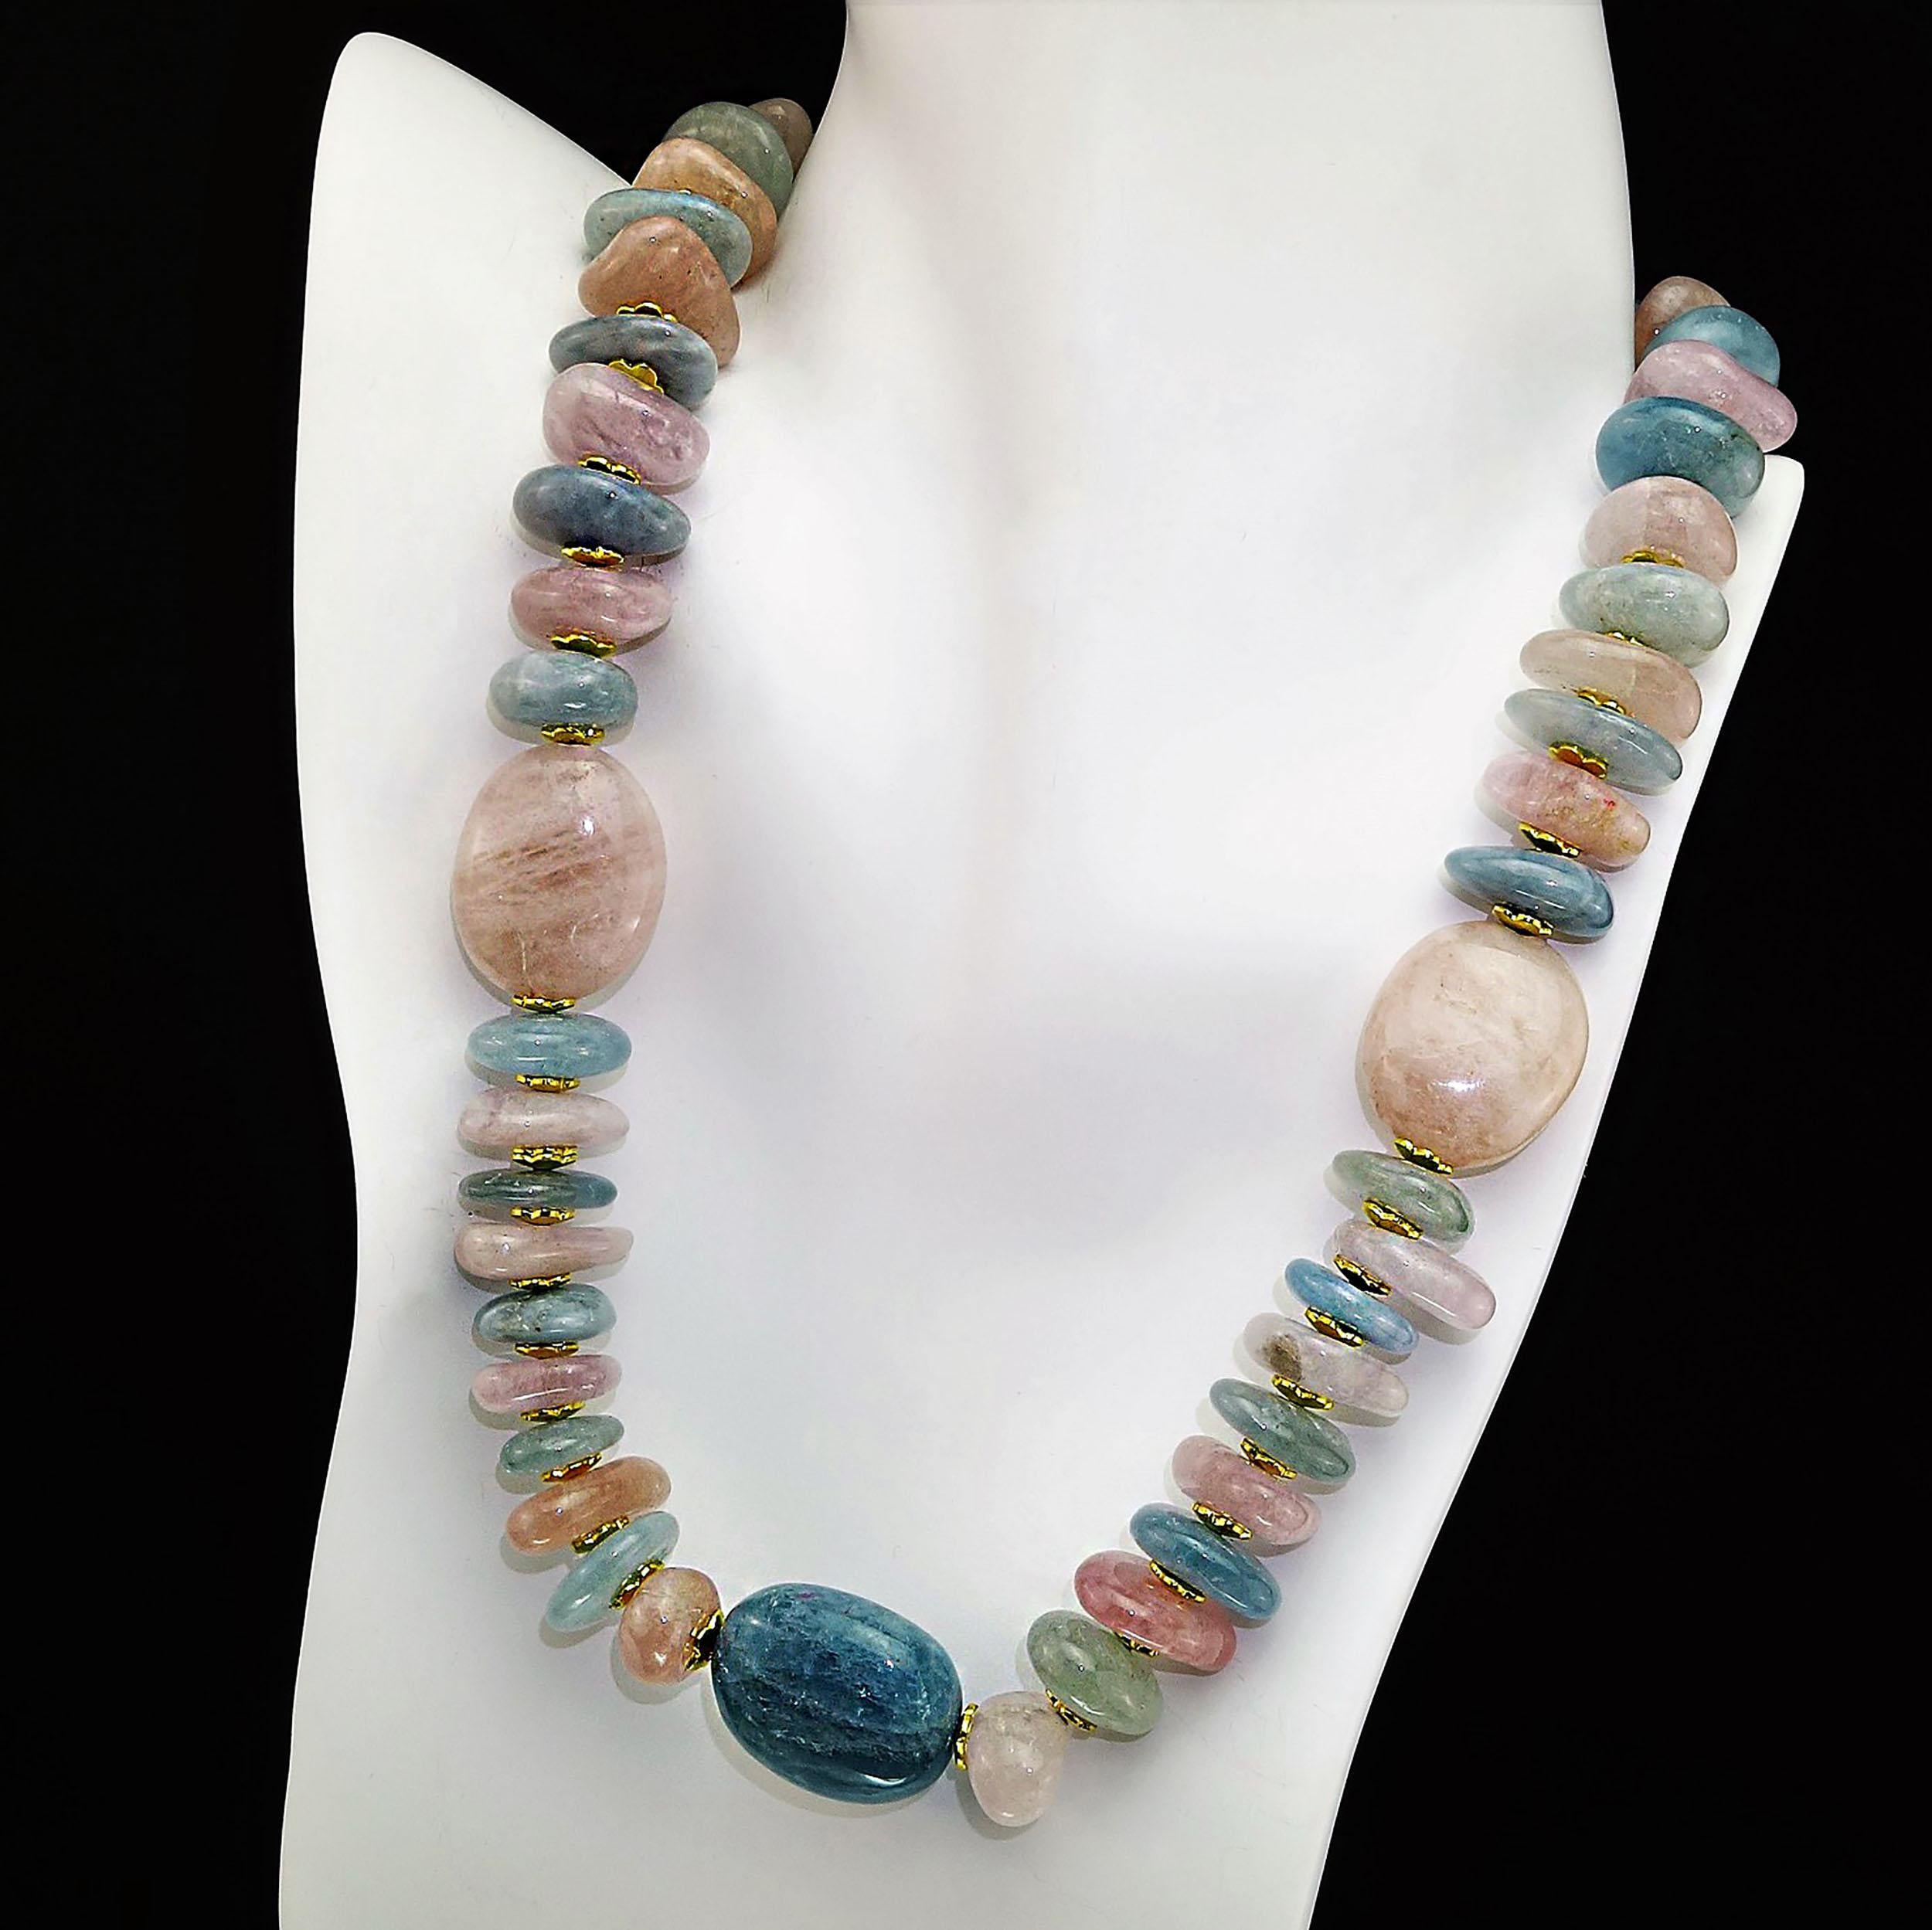 Necklace of glowing polished tumbled rondelles of Pink Morganite and Blue Aquamarine with focals of larger flat tablets of same. The polished tumbled rondelles (12-20mm in size) alternate in color and are enhanced with gold tone fluted spacers. A